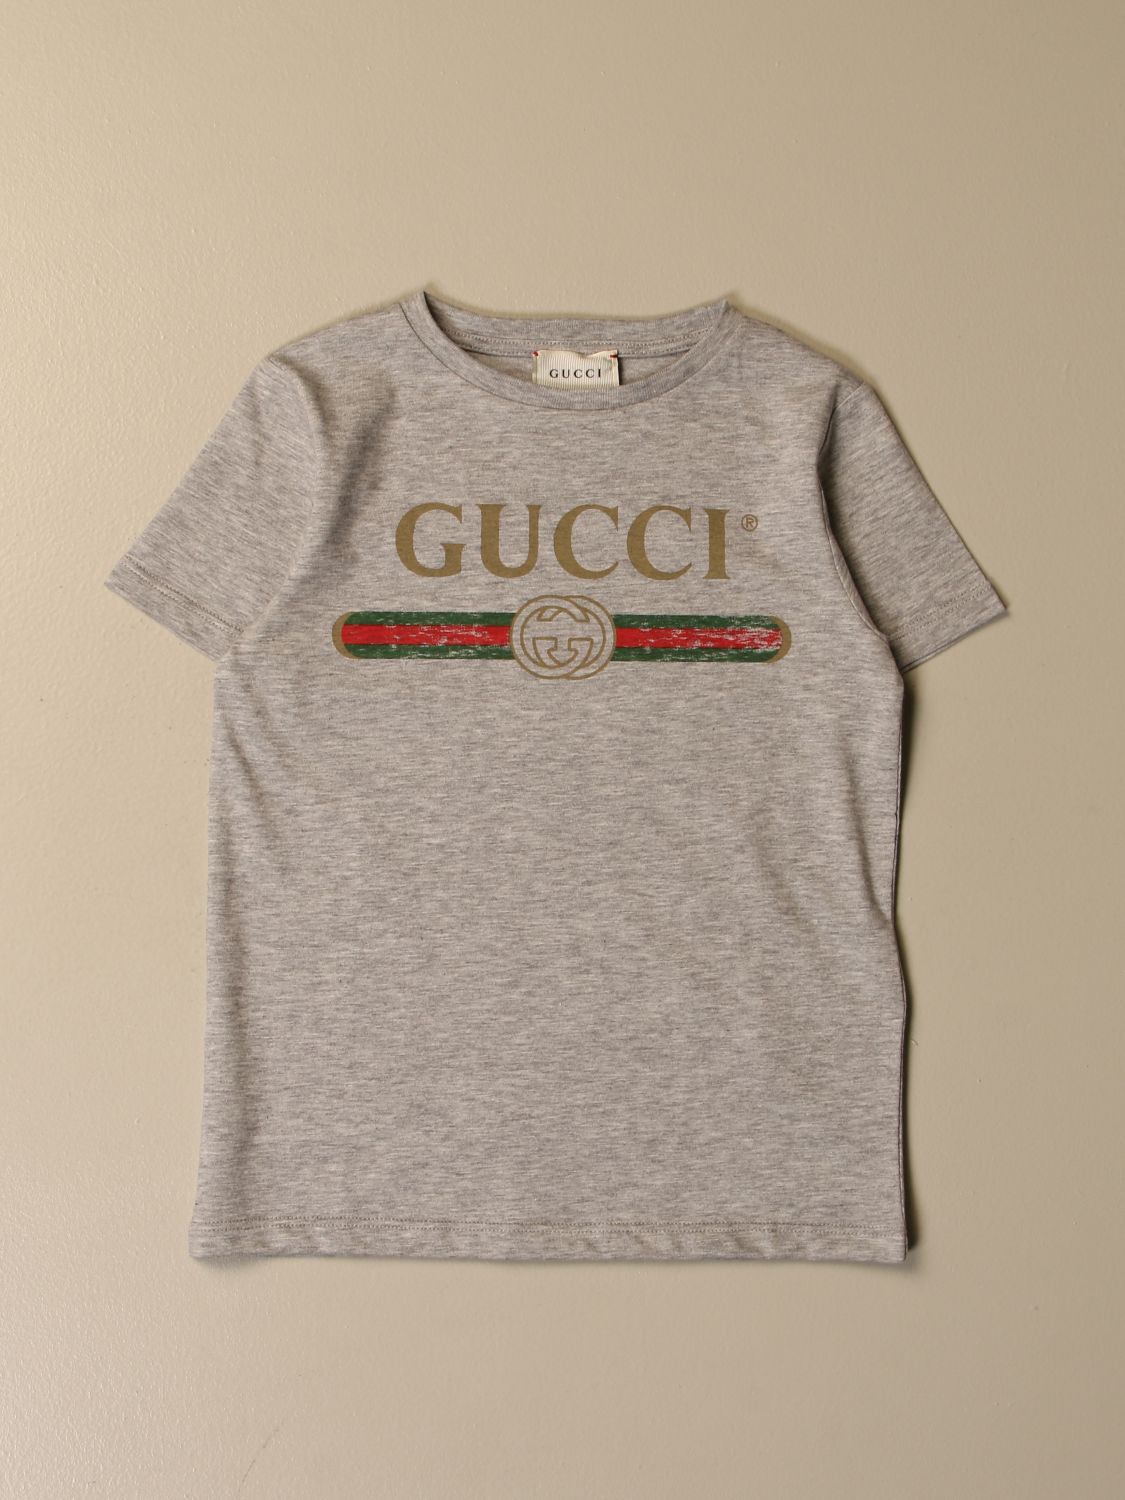 GUCCI: T-shirt with vintage logo - | Gucci t-shirt 503628 X3L02 online at GIGLIO.COM